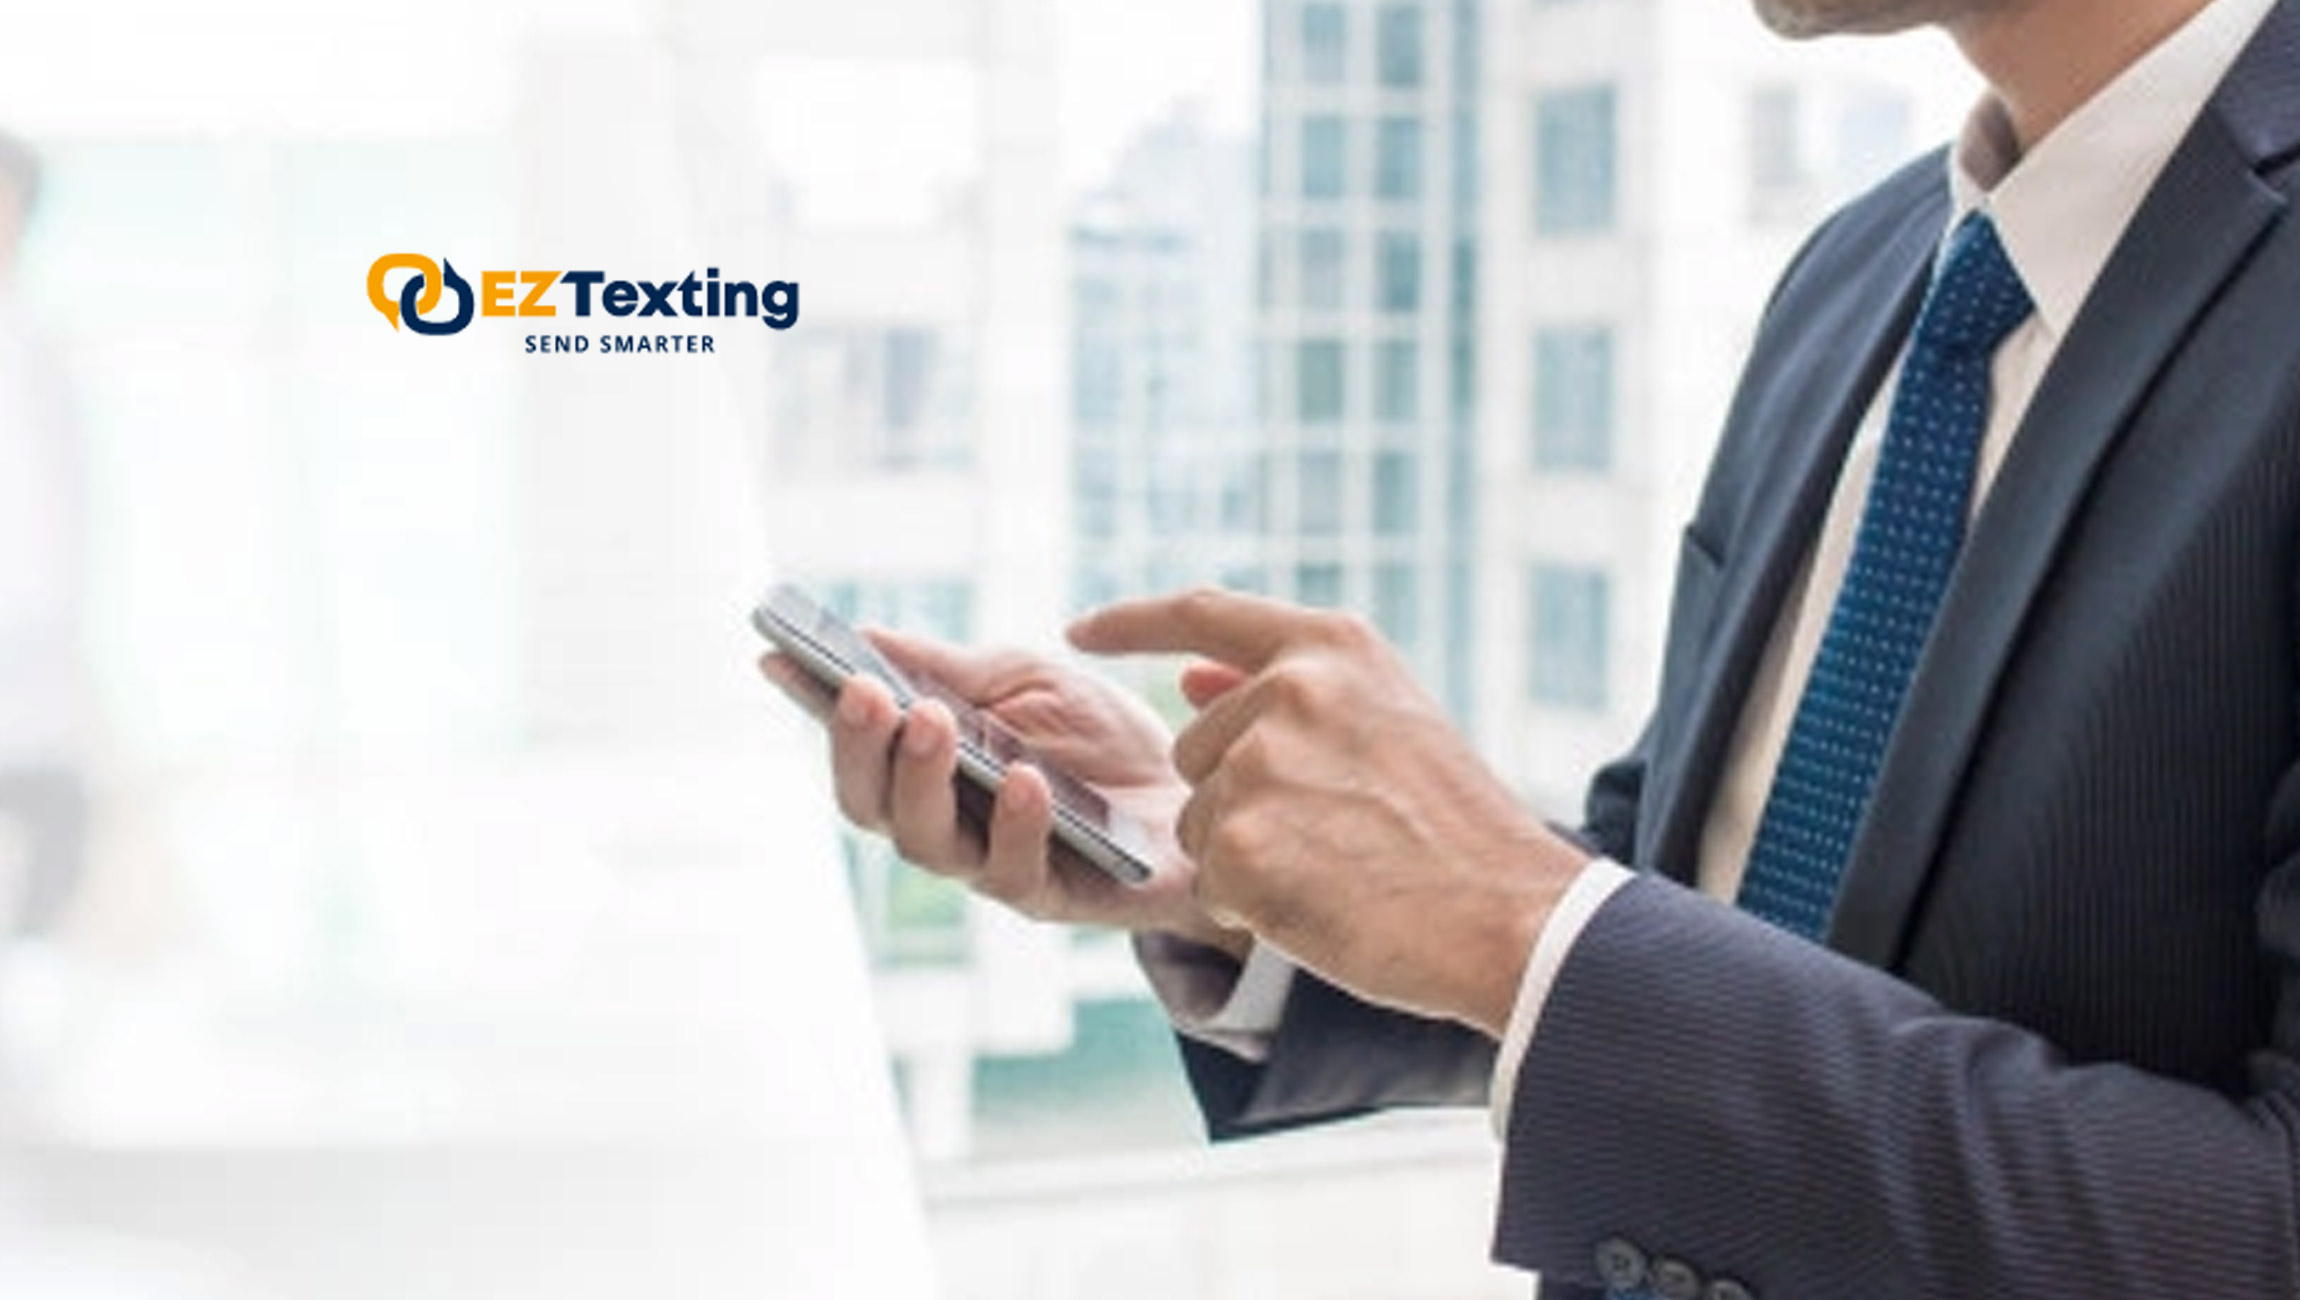 EZ Texting Continues Record Growth in Text Communications Market